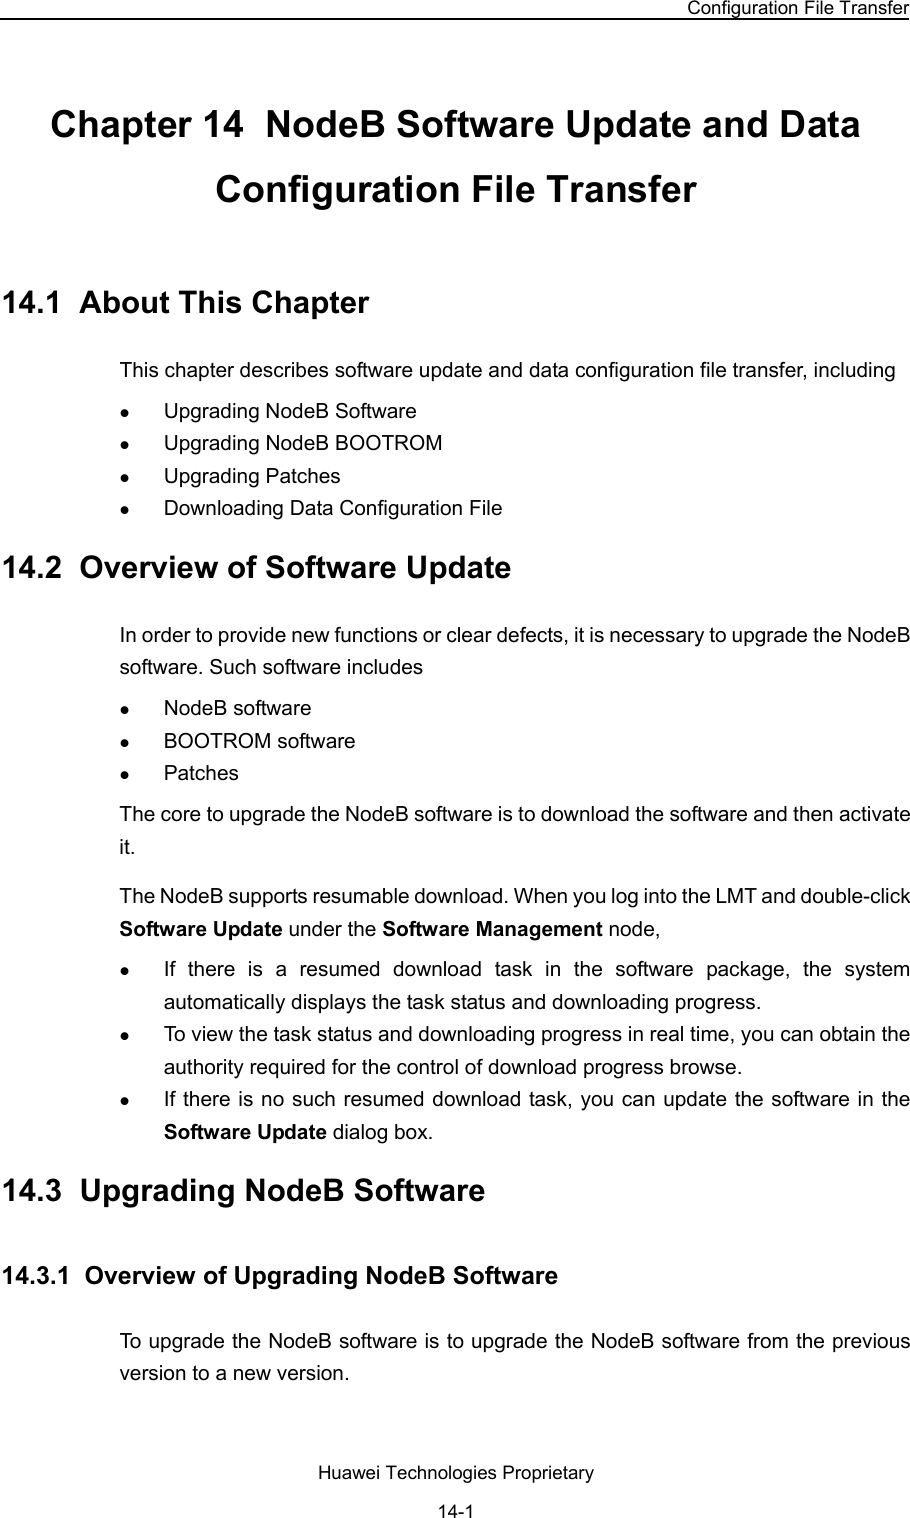 NodeB LMT User Guide Chapter 14  NodeB Software Update and Data Configuration File Transfer Huawei Technologies Proprietary 14-1 Chapter 14  NodeB Software Update and Data Configuration File Transfer 14.1  About This Chapter This chapter describes software update and data configuration file transfer, including z Upgrading NodeB Software z Upgrading NodeB BOOTROM z Upgrading Patches z Downloading Data Configuration File 14.2  Overview of Software Update In order to provide new functions or clear defects, it is necessary to upgrade the NodeB software. Such software includes z NodeB software z BOOTROM software z Patches The core to upgrade the NodeB software is to download the software and then activate it.  The NodeB supports resumable download. When you log into the LMT and double-click Software Update under the Software Management node,  z If there is a resumed download task in the software package, the system automatically displays the task status and downloading progress.  z To view the task status and downloading progress in real time, you can obtain the authority required for the control of download progress browse. z If there is no such resumed download task, you can update the software in the Software Update dialog box. 14.3  Upgrading NodeB Software 14.3.1  Overview of Upgrading NodeB Software To upgrade the NodeB software is to upgrade the NodeB software from the previous version to a new version.  